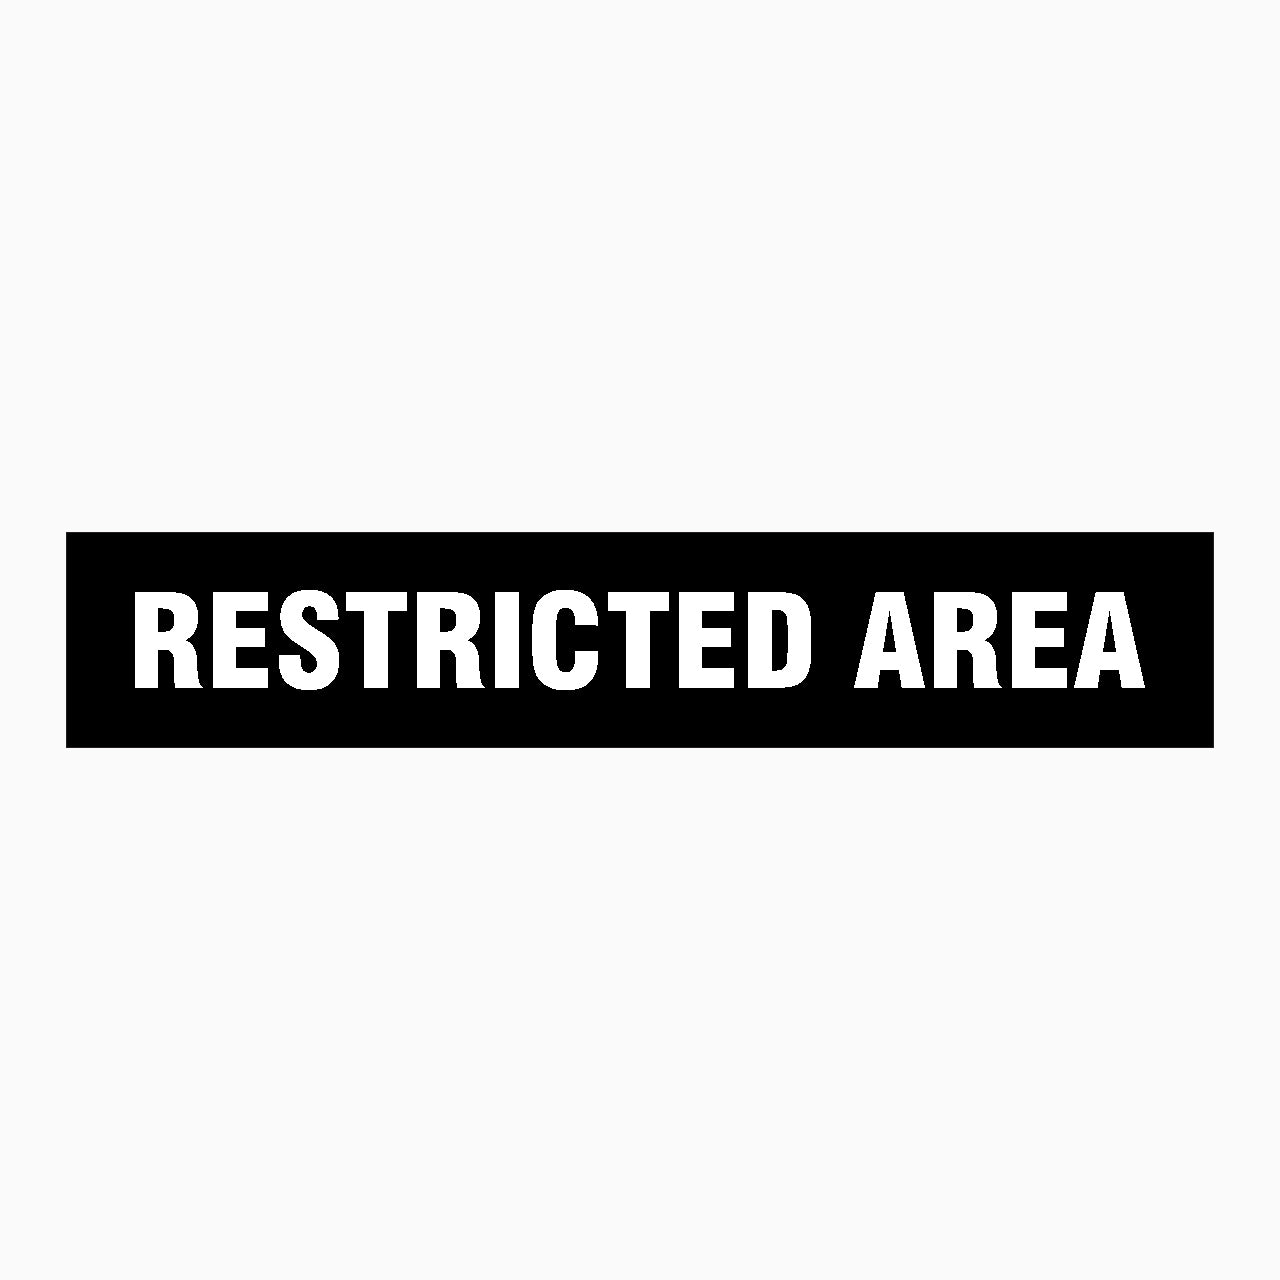 RESTRICTED AREA SIGN